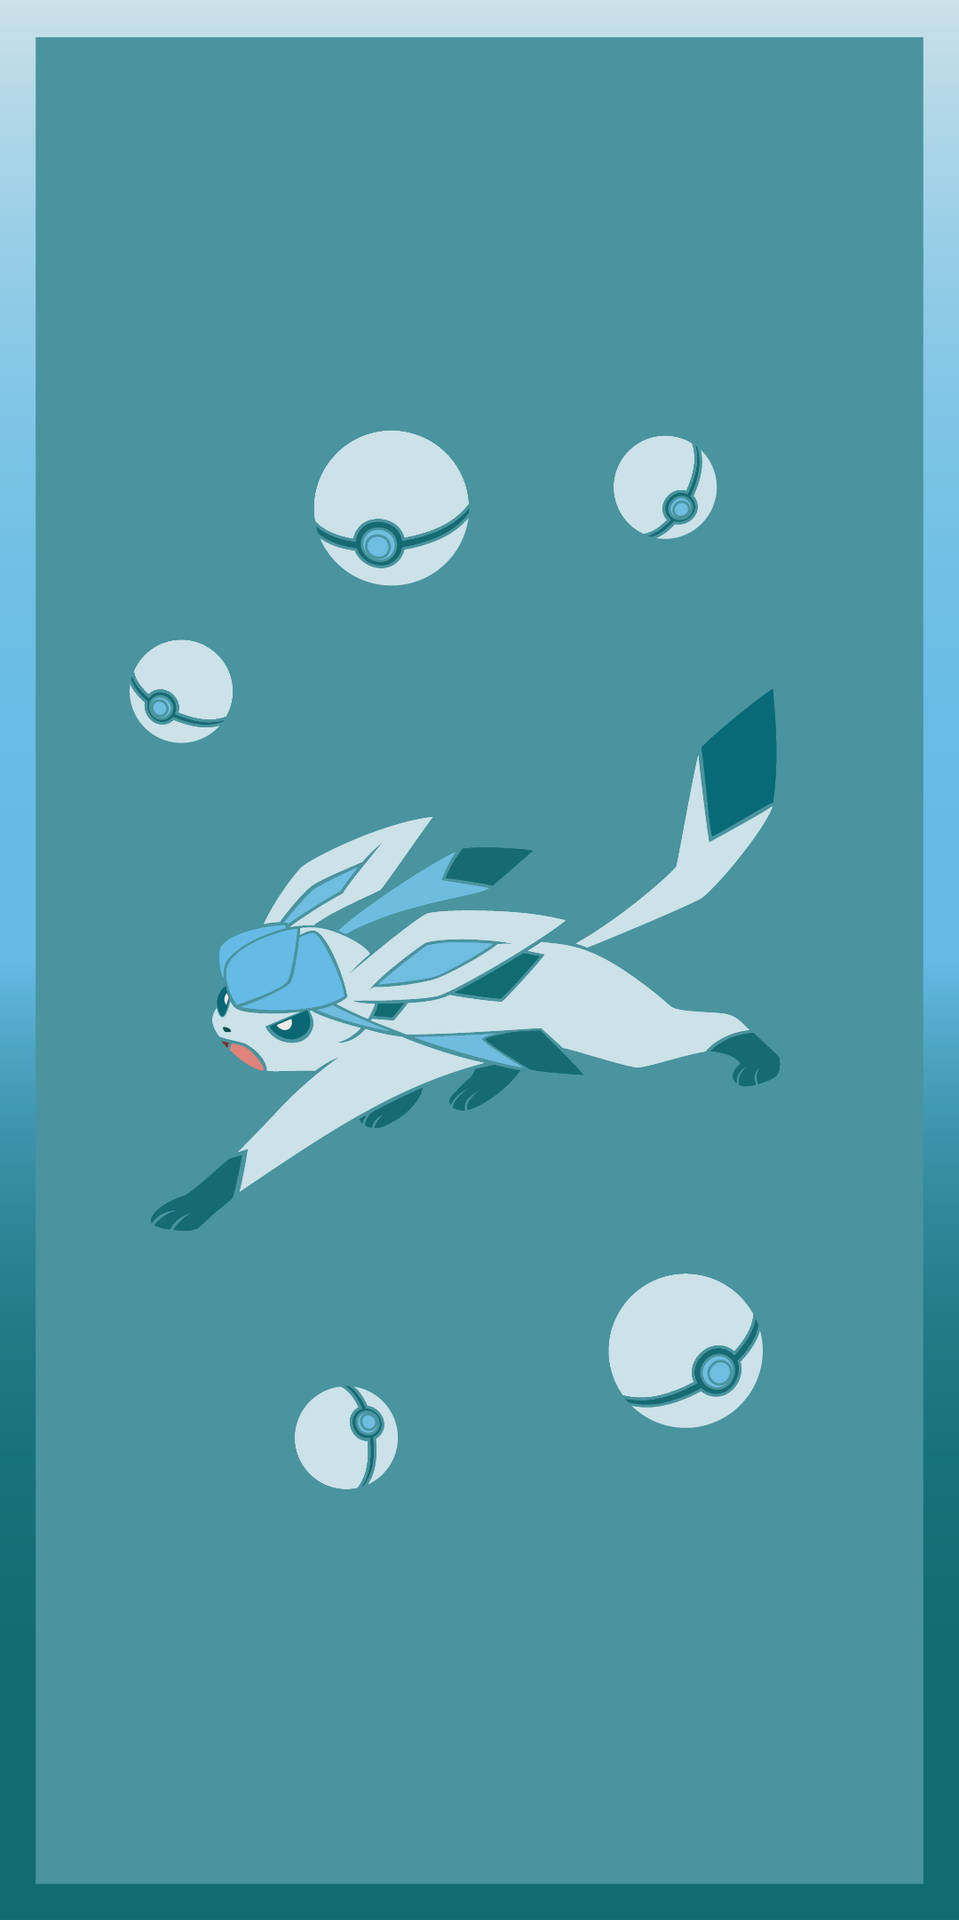 Glaceon, The Fairy-type Pokémon, Stands In Defiance Of Her Opponents. Background